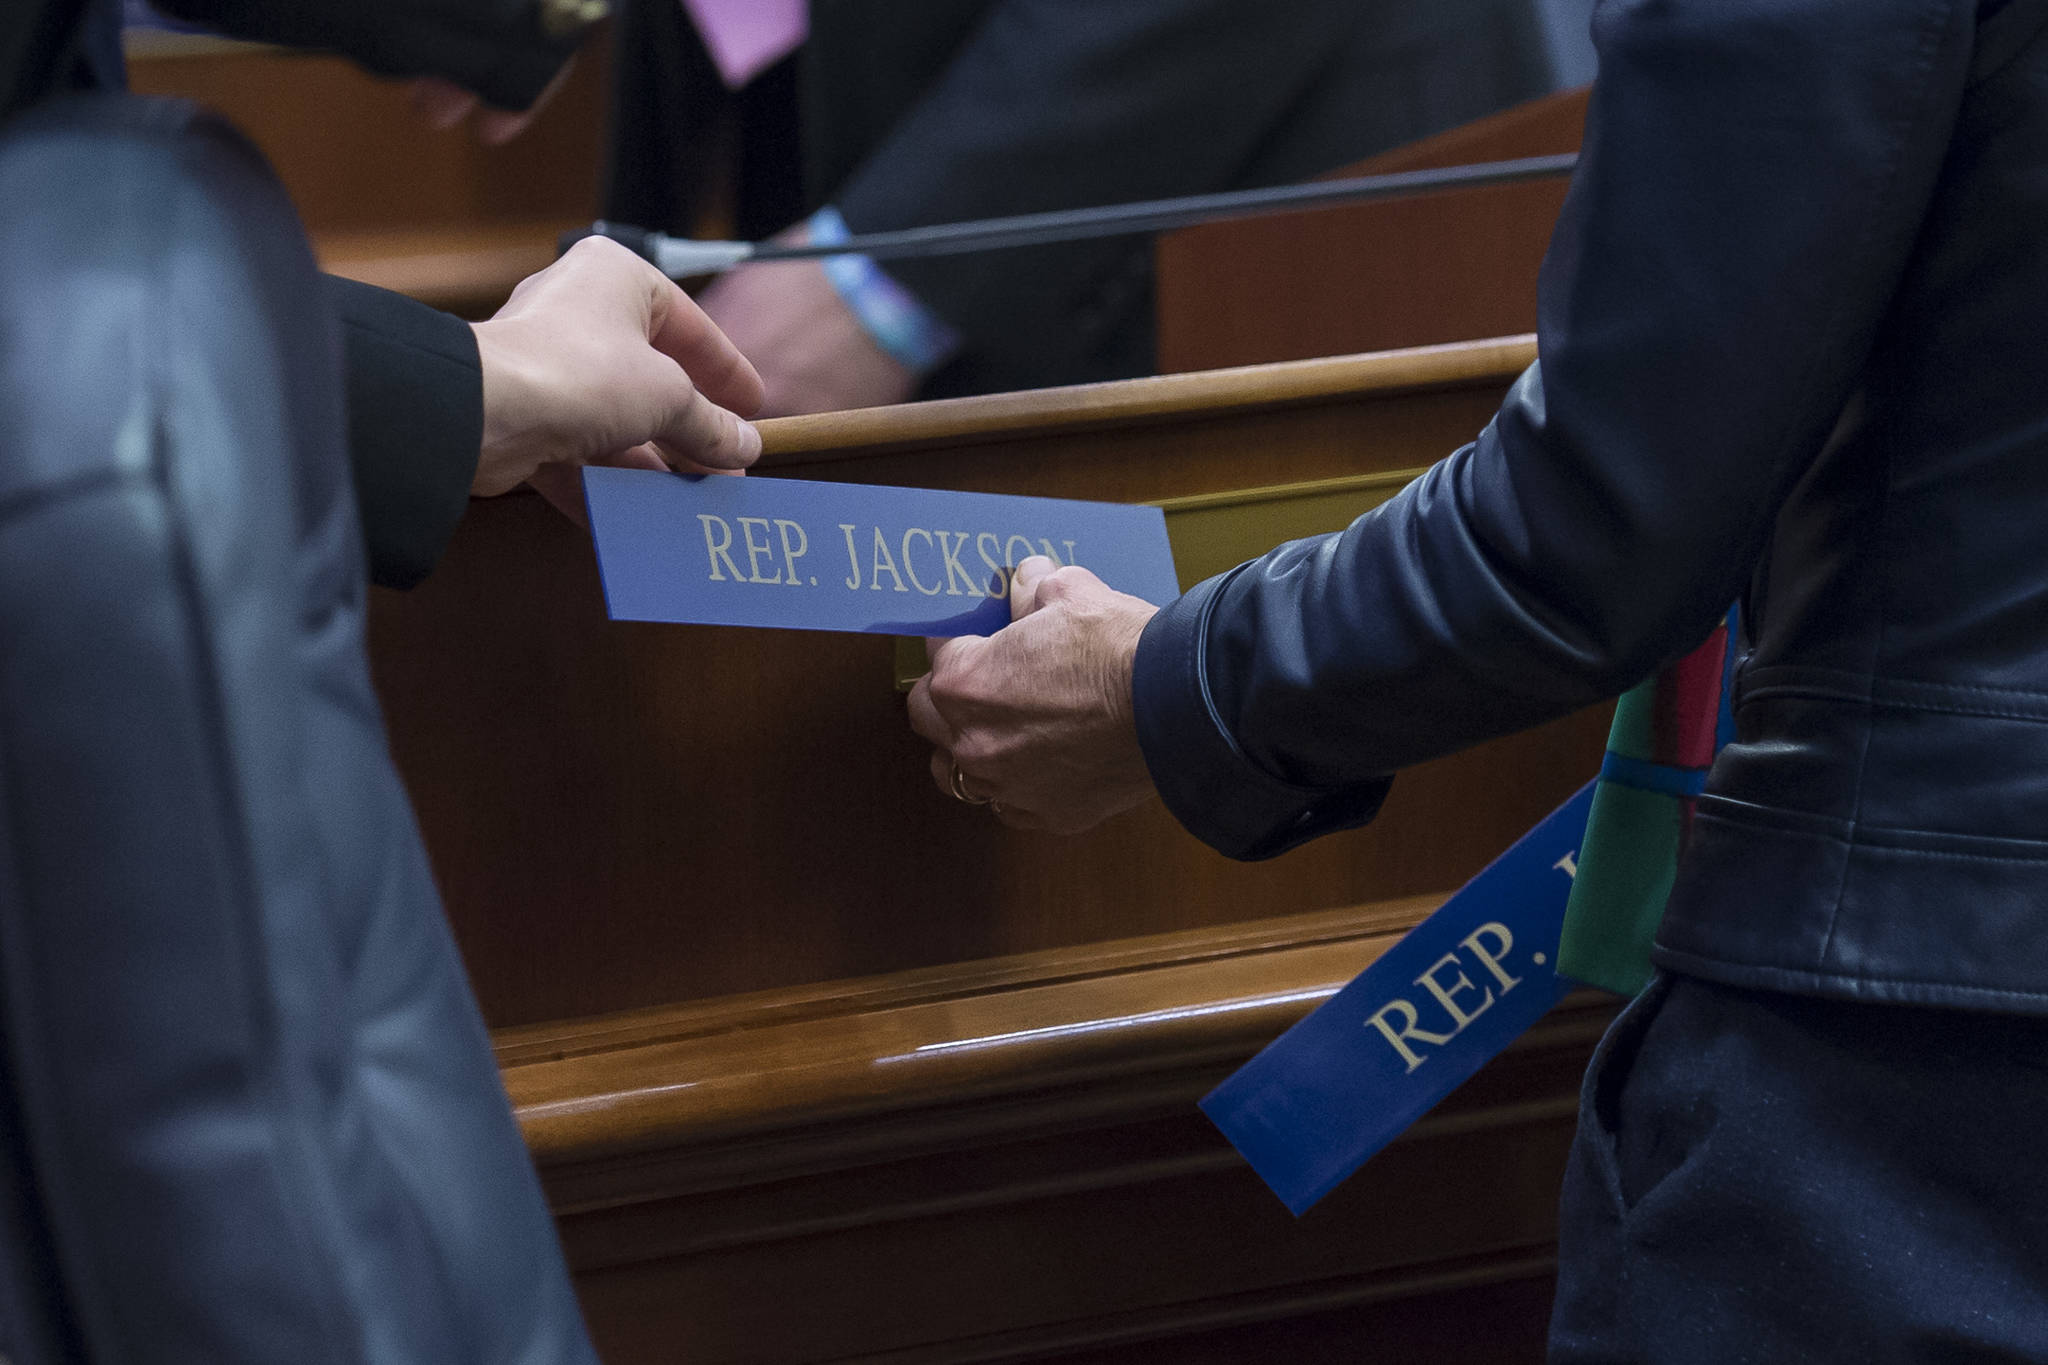 Rep. Sharon Jackson receives her desk name plate after being sworn into the House District 13 seat on Thursday, Jan. 17, 2019. (Michael Penn | Juneau Empire)